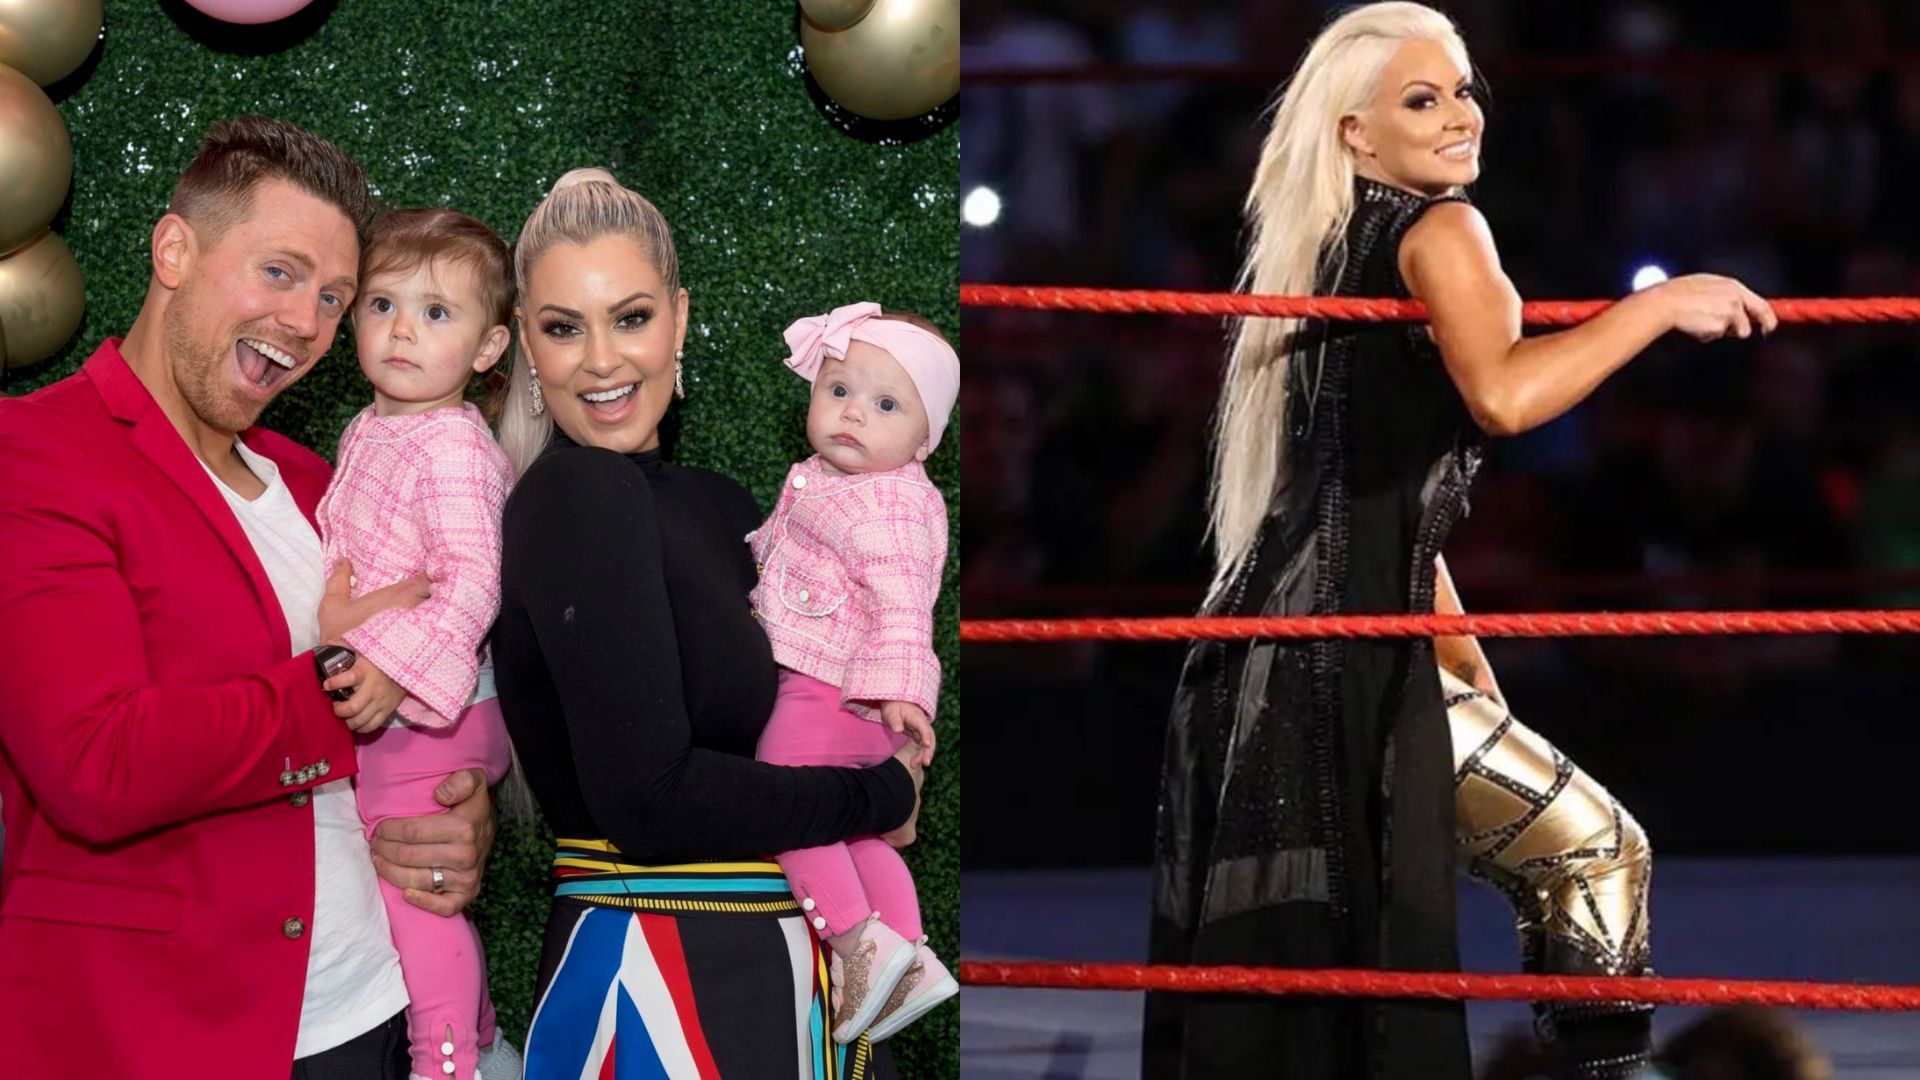 Maryse had her latest WWE match in 2022 